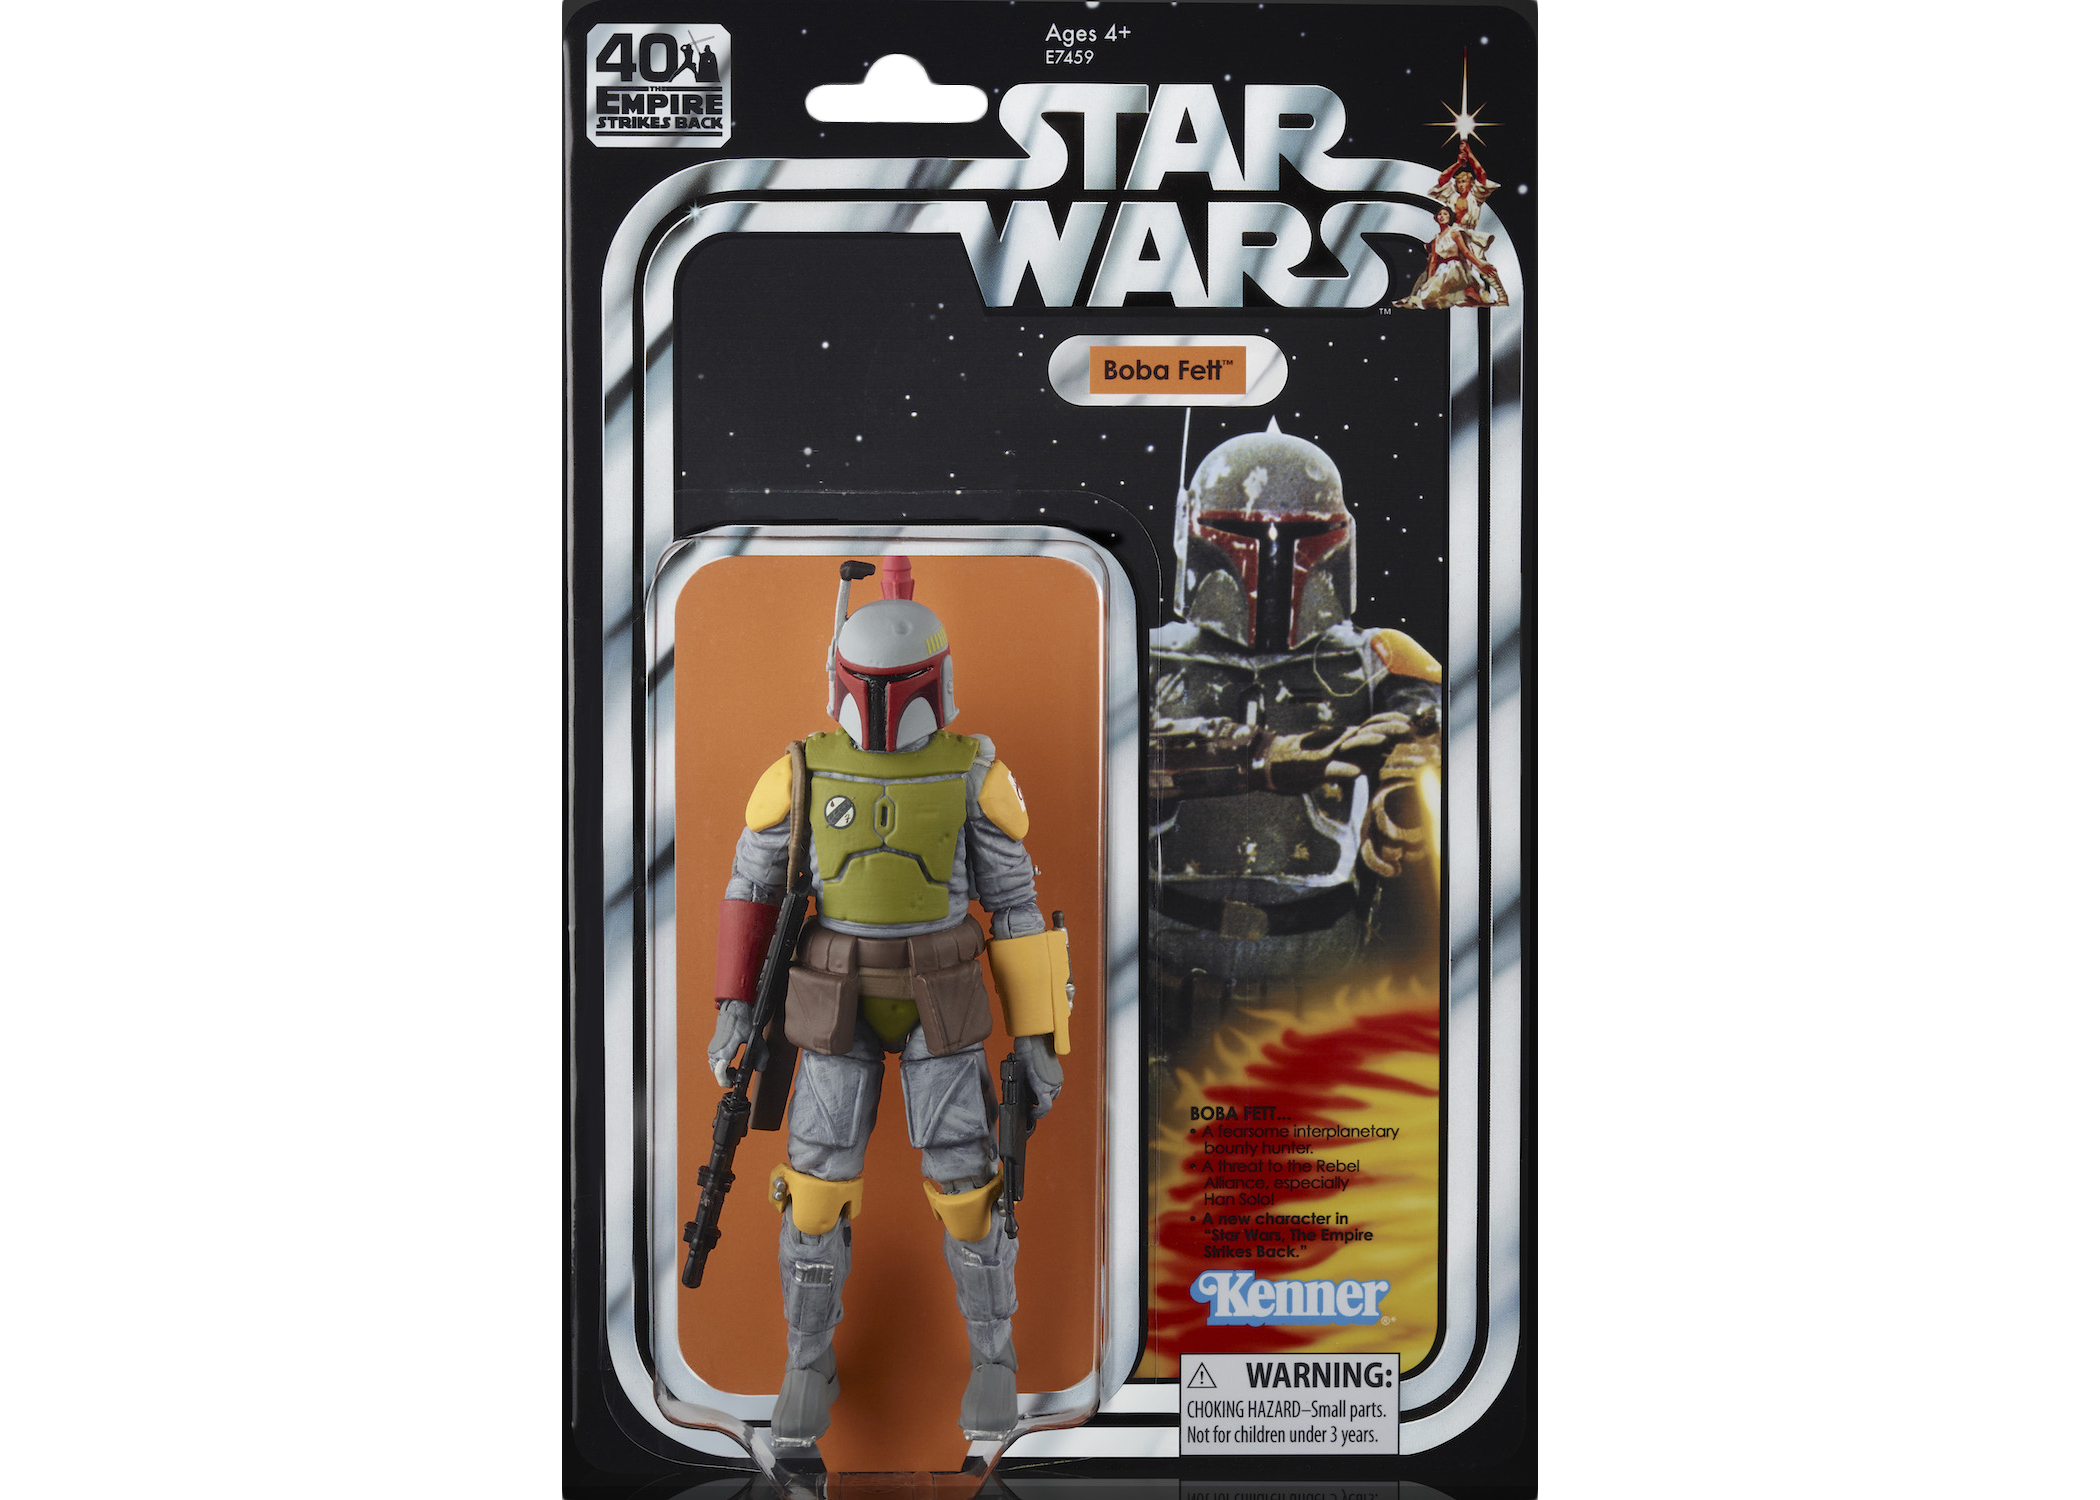 Hasbro Boba Fett SDCC 2019 Star Wars 40th Anniversary Action Figure for sale online 